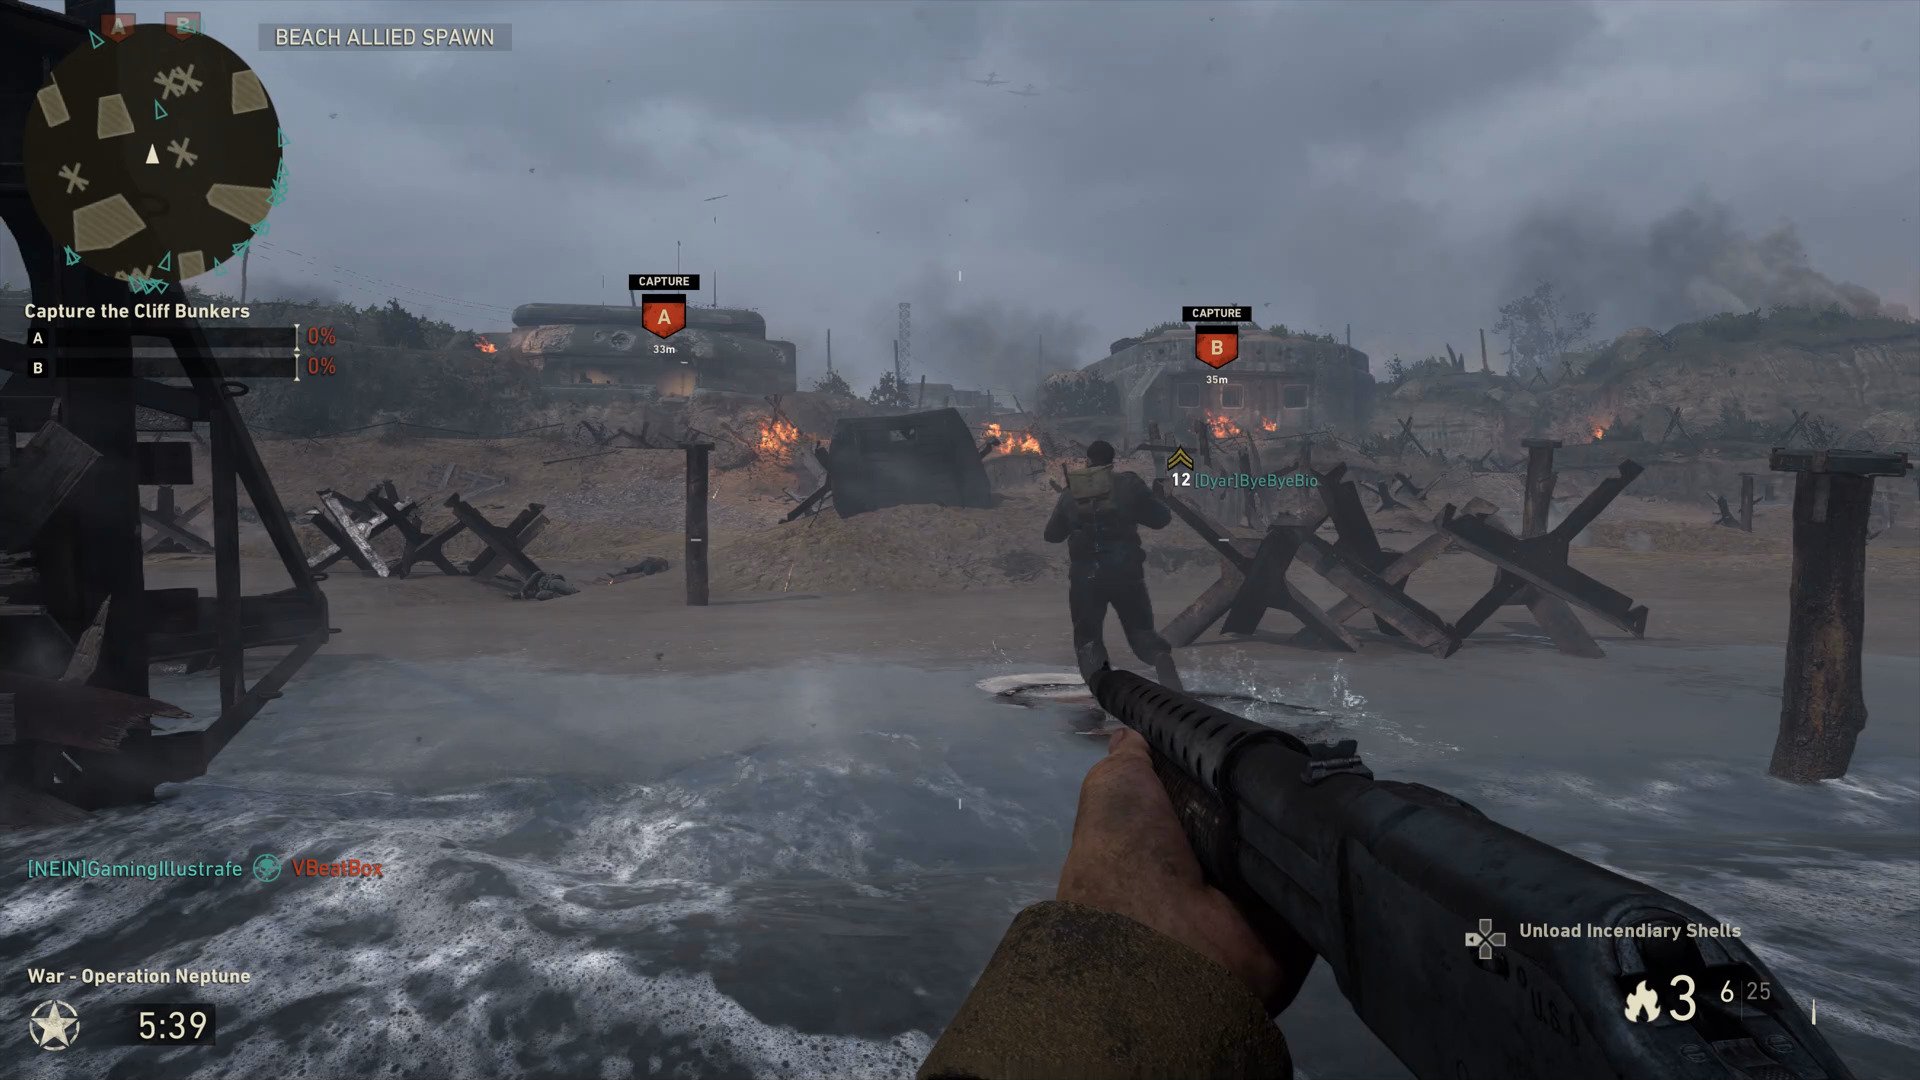 https://www.windowscentral.com/sites/wpcentral.com/files/styles/xlarge/public/field/image/2017/11/Call-of-Duty-WWII-Multiplayer-War-screenshot-11_0.jpg?itok=NoWf4W-s